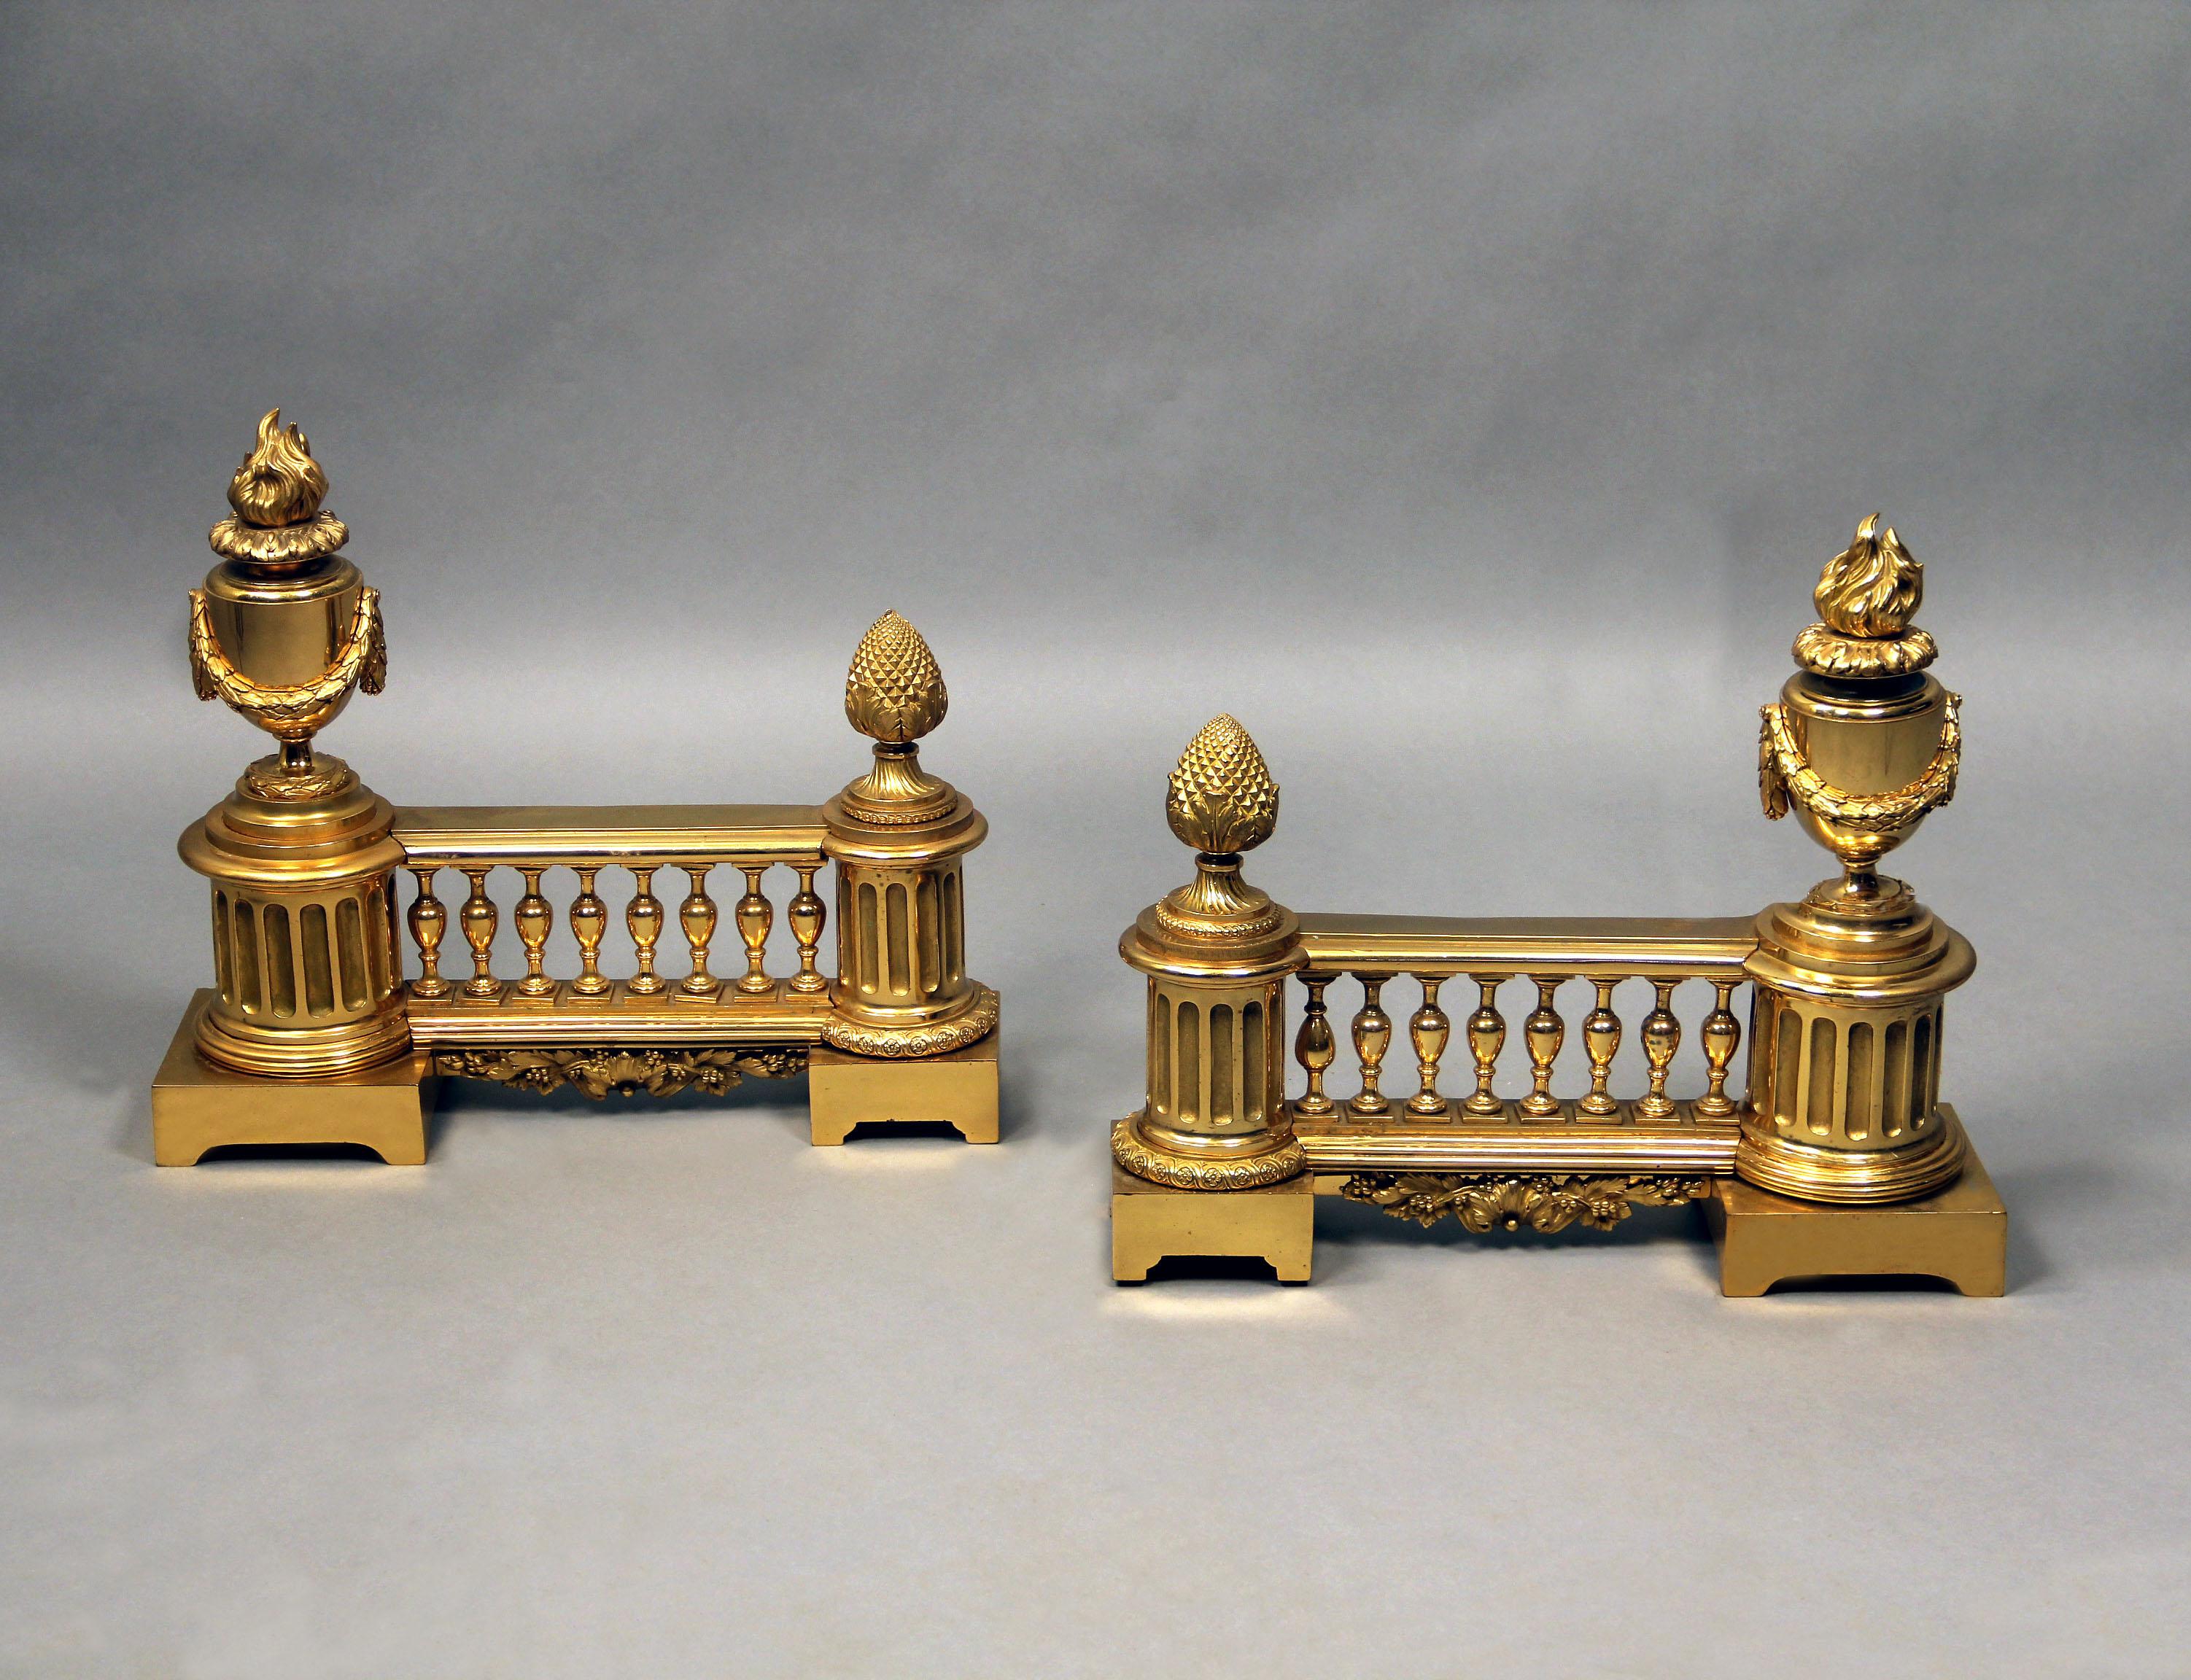 A Nice Pair of Late 19th Century Gilt Bronze Chenets

Each with swagged flaming-urn finial, flanked by pine cone finial.